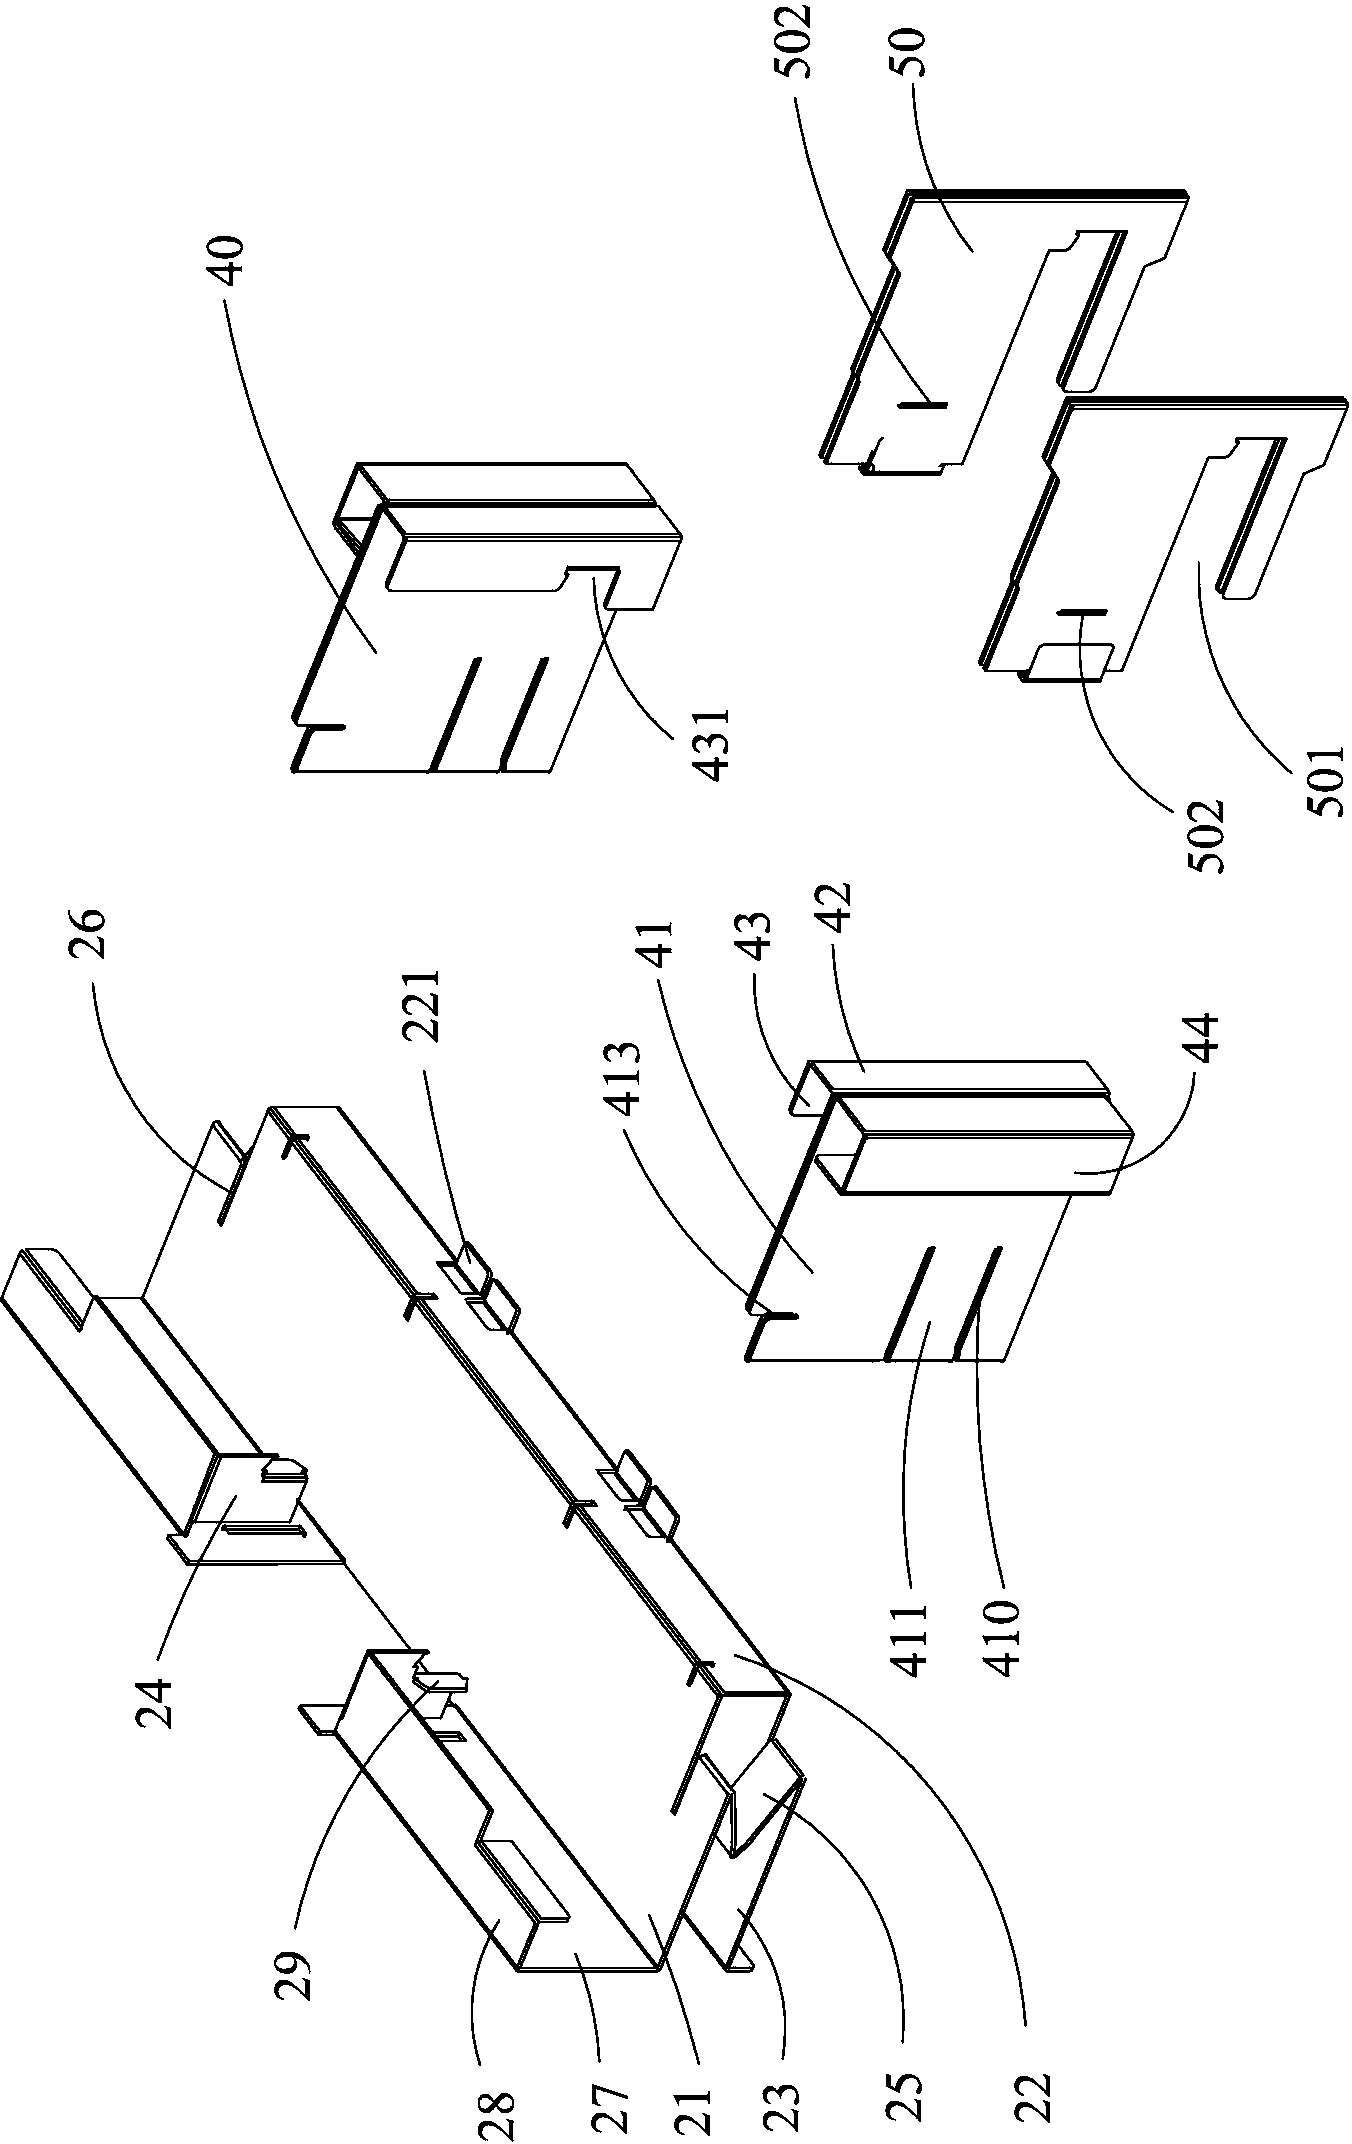 Display buffering packing device and display buffering packing box